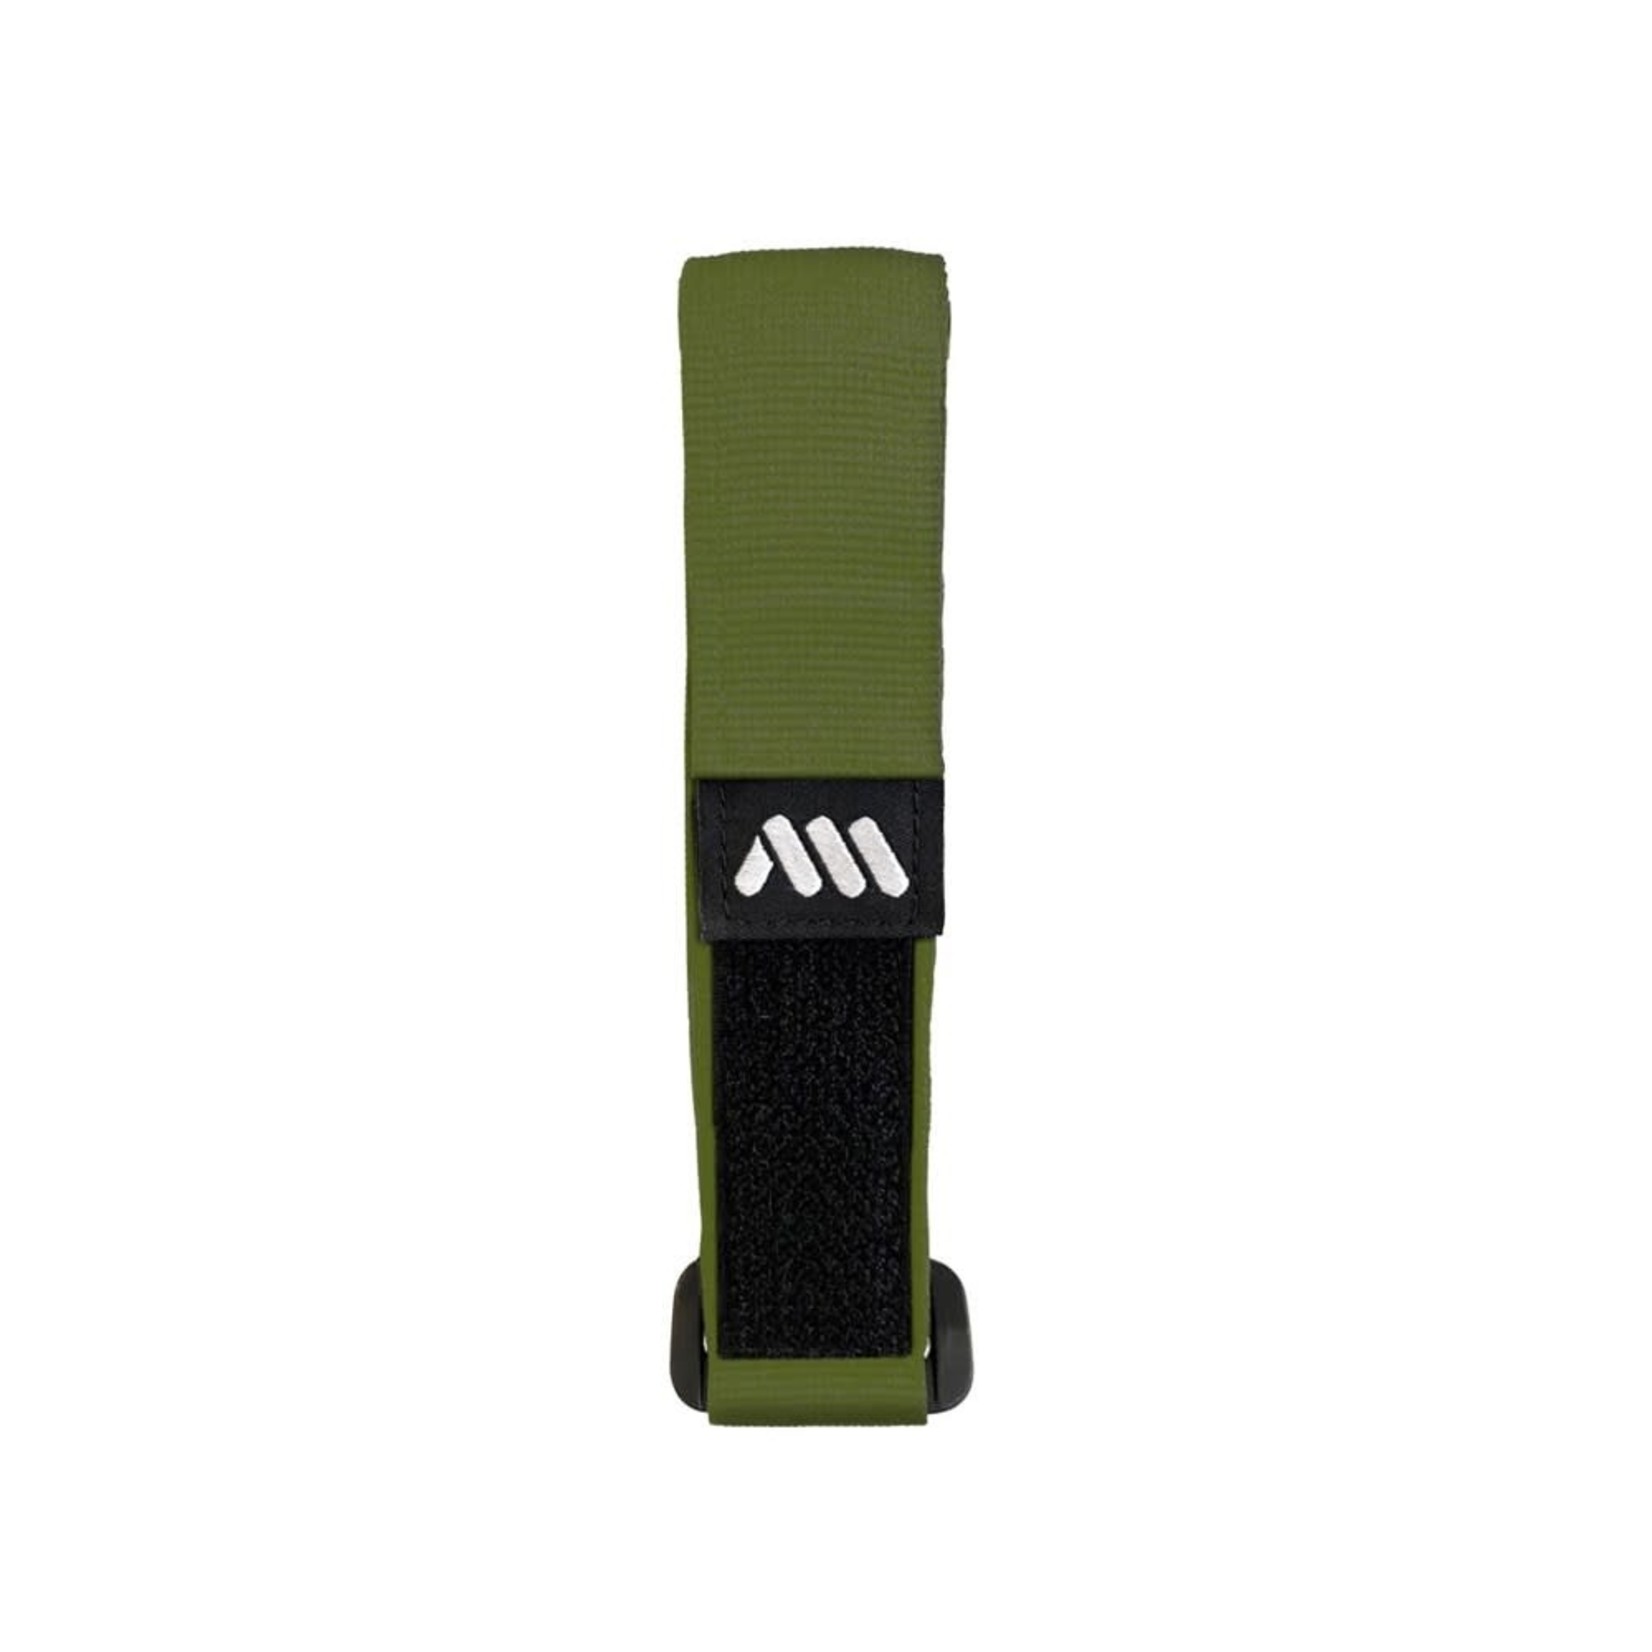 All Mountain Style All Mountain AMS Style Bicycle Strap - Green - 550 X 30mm Polyester Fabric